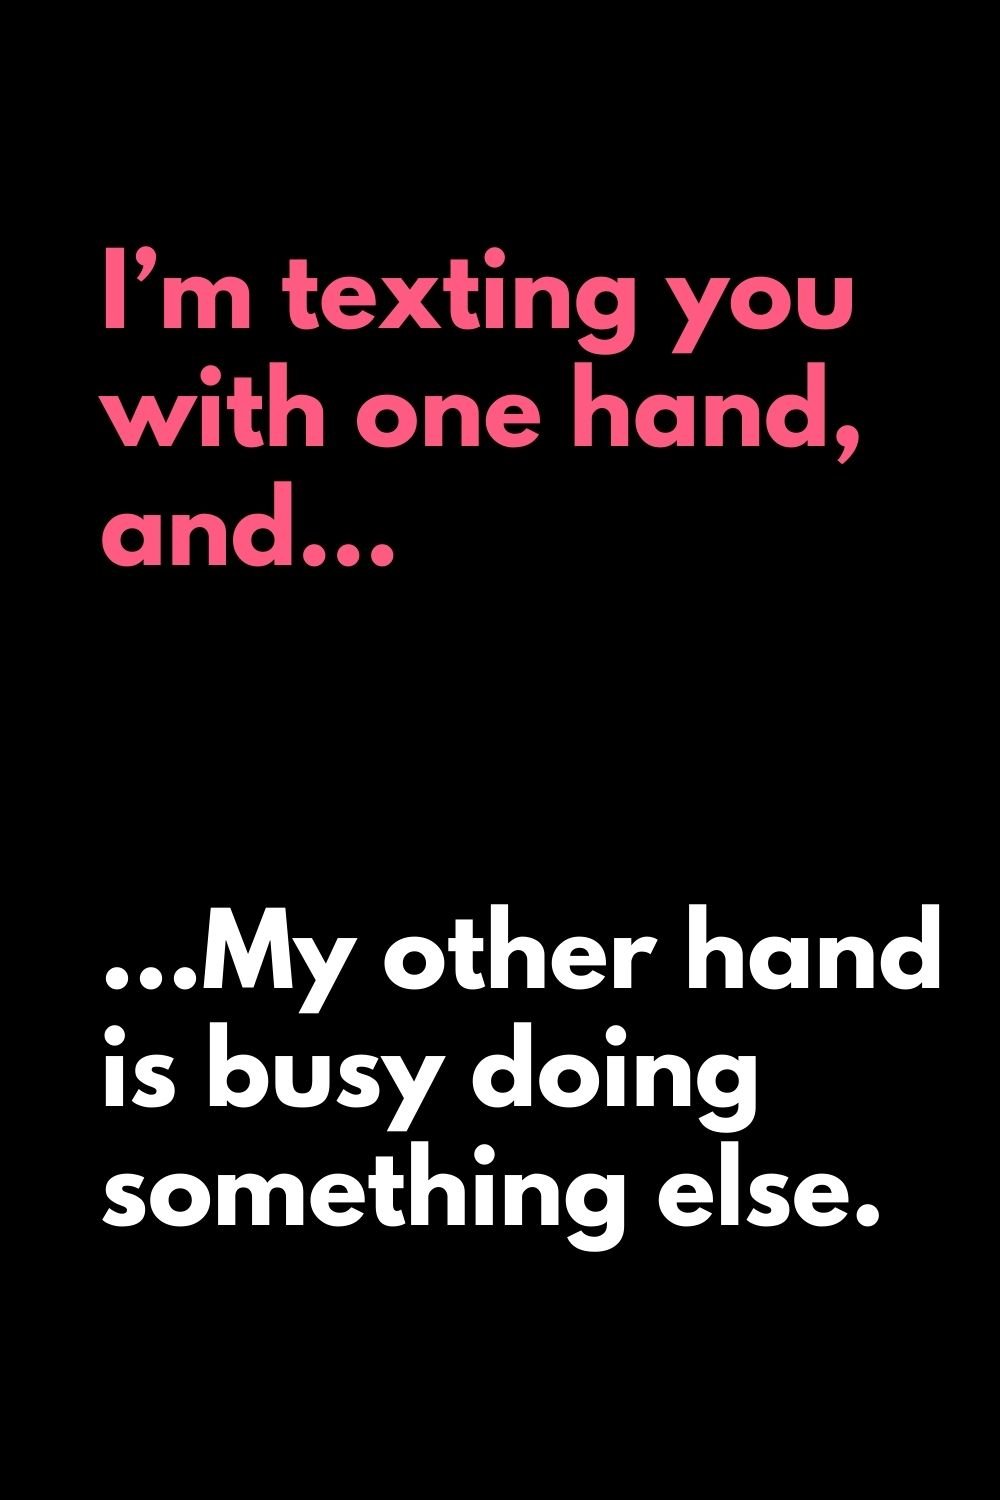 im texting you with one hand and my other other hand is busy